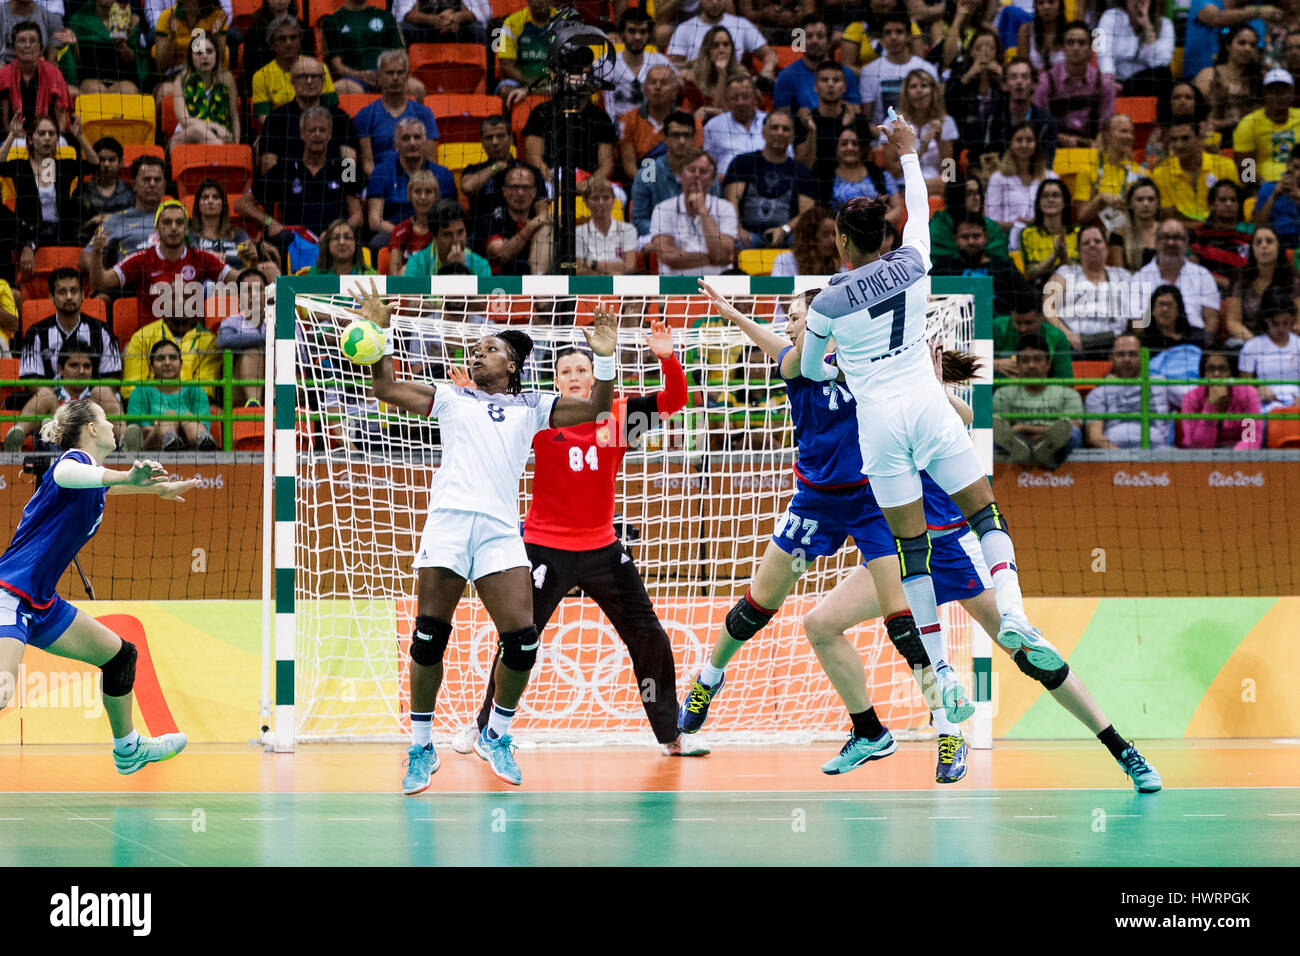 Rio de Janeiro, Brazil. 20 August 2016 Allison Pineau (FRA) #7 competes in the women's handball gold medal match Russia vs. France at the 2016 Olympic Stock Photo